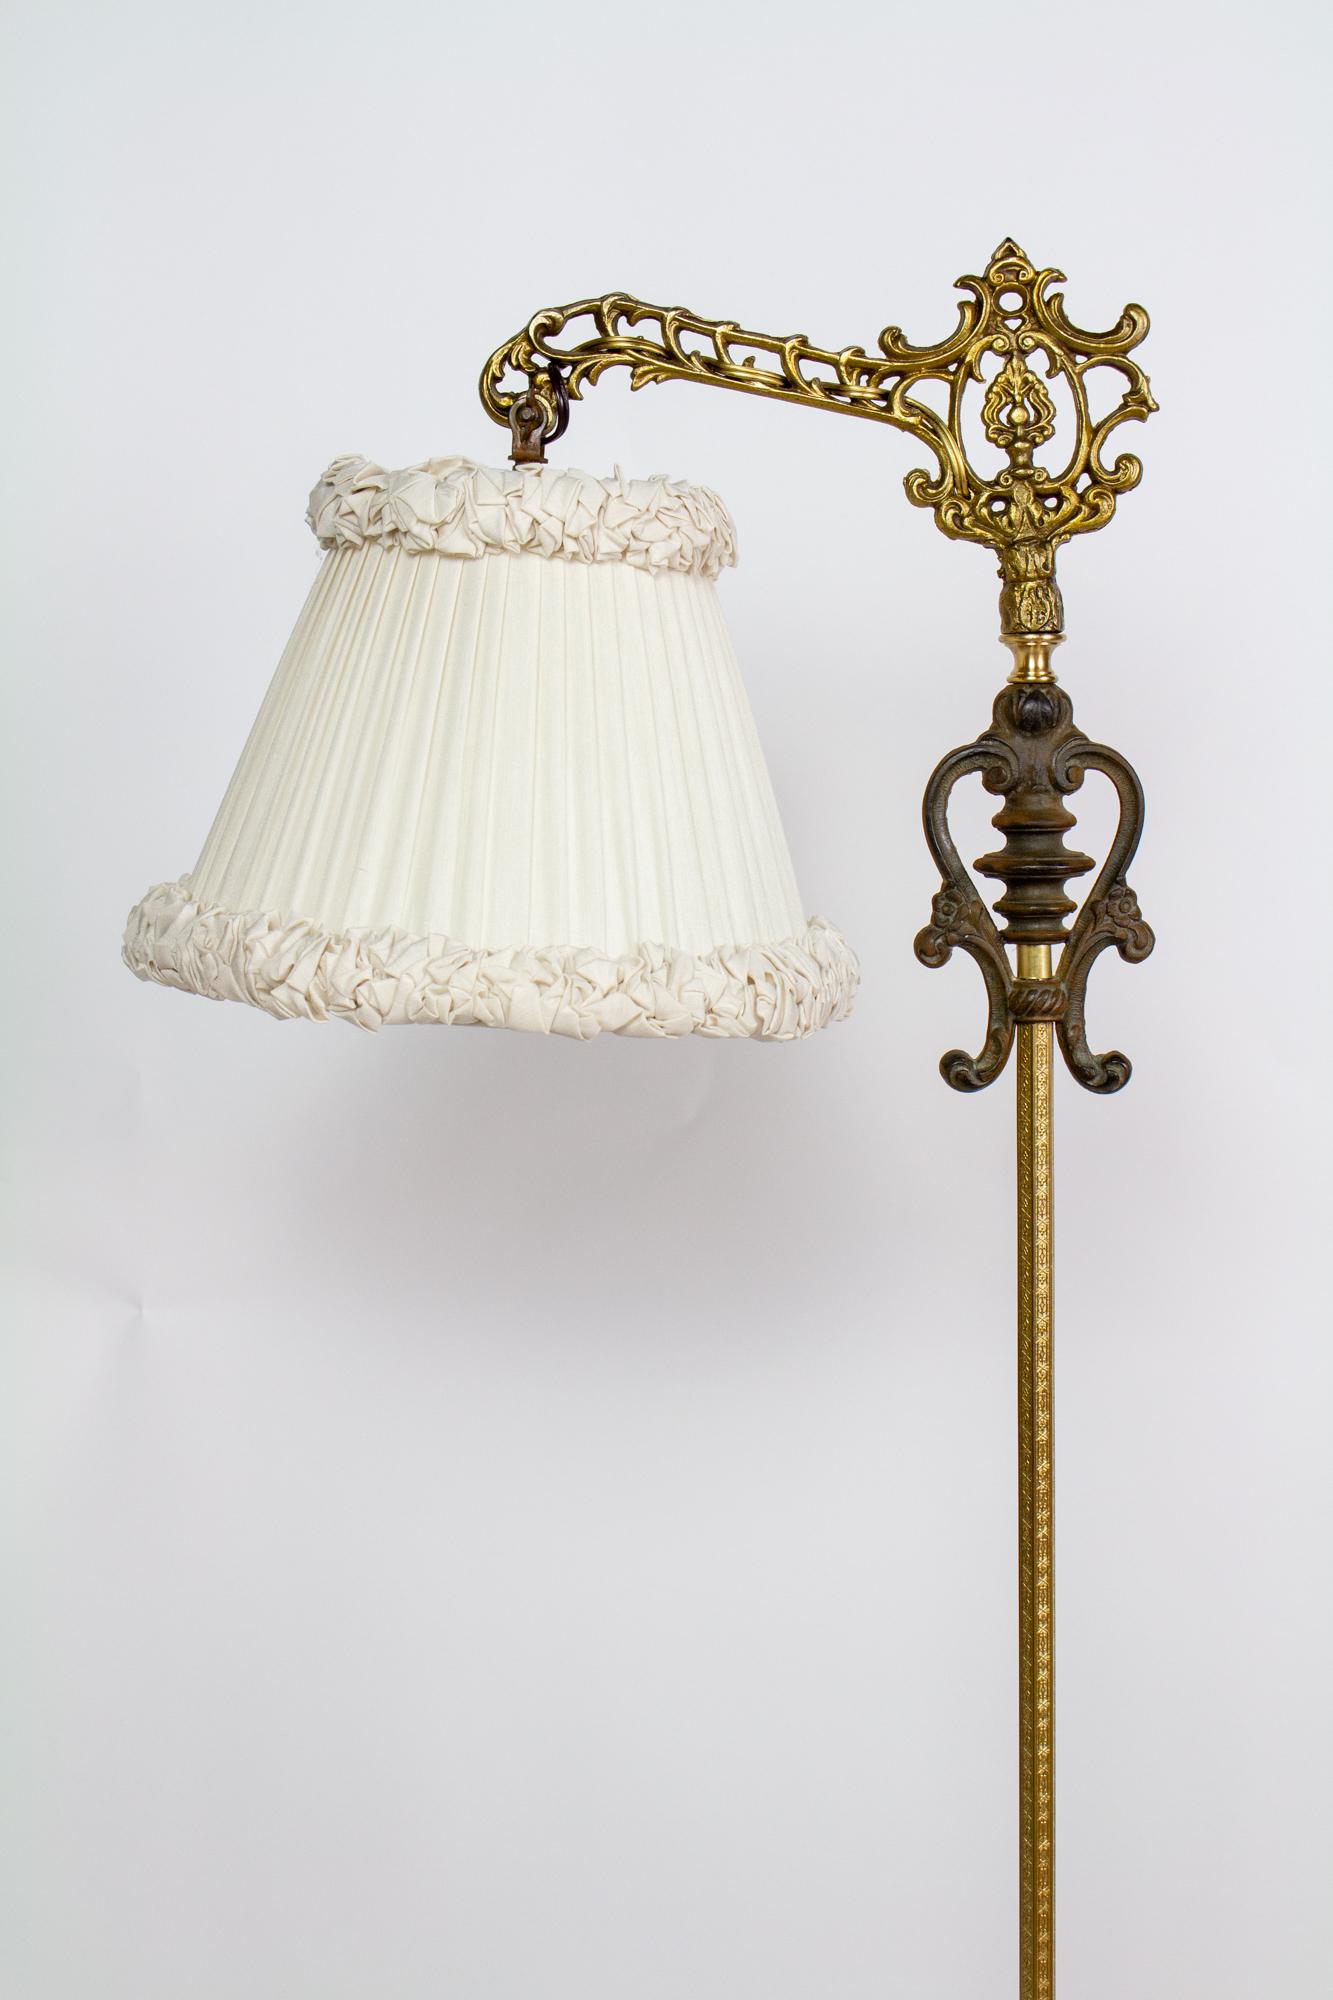 Ornate Rococo Revival Bridge Lamp with Pleated and Ruched off White Silk Shade For Sale 1